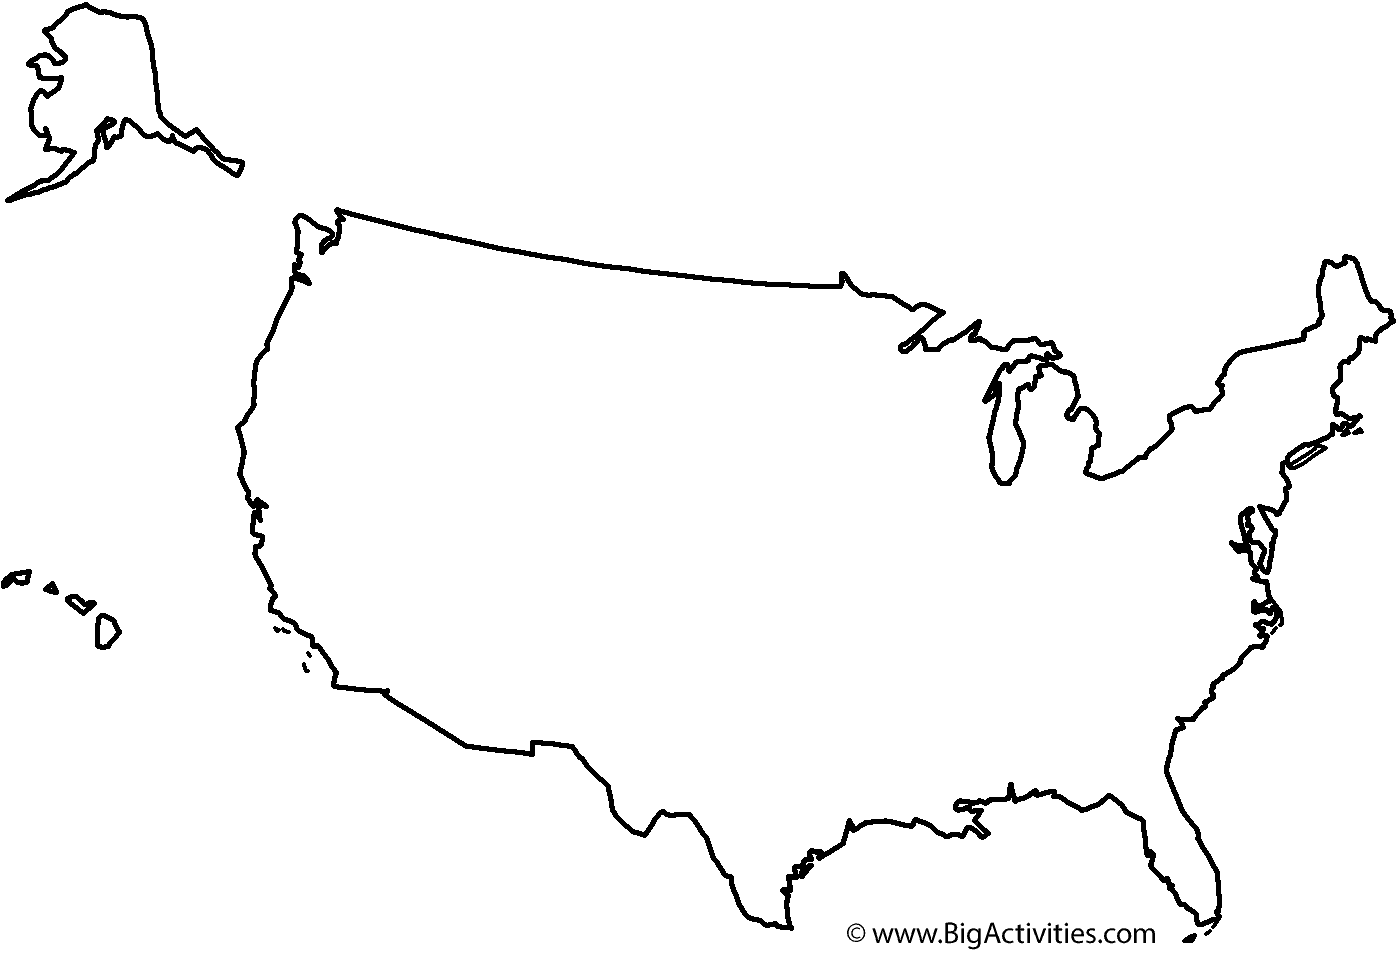 Map Of The United States With Title - Coloring Page (Memorial Day)